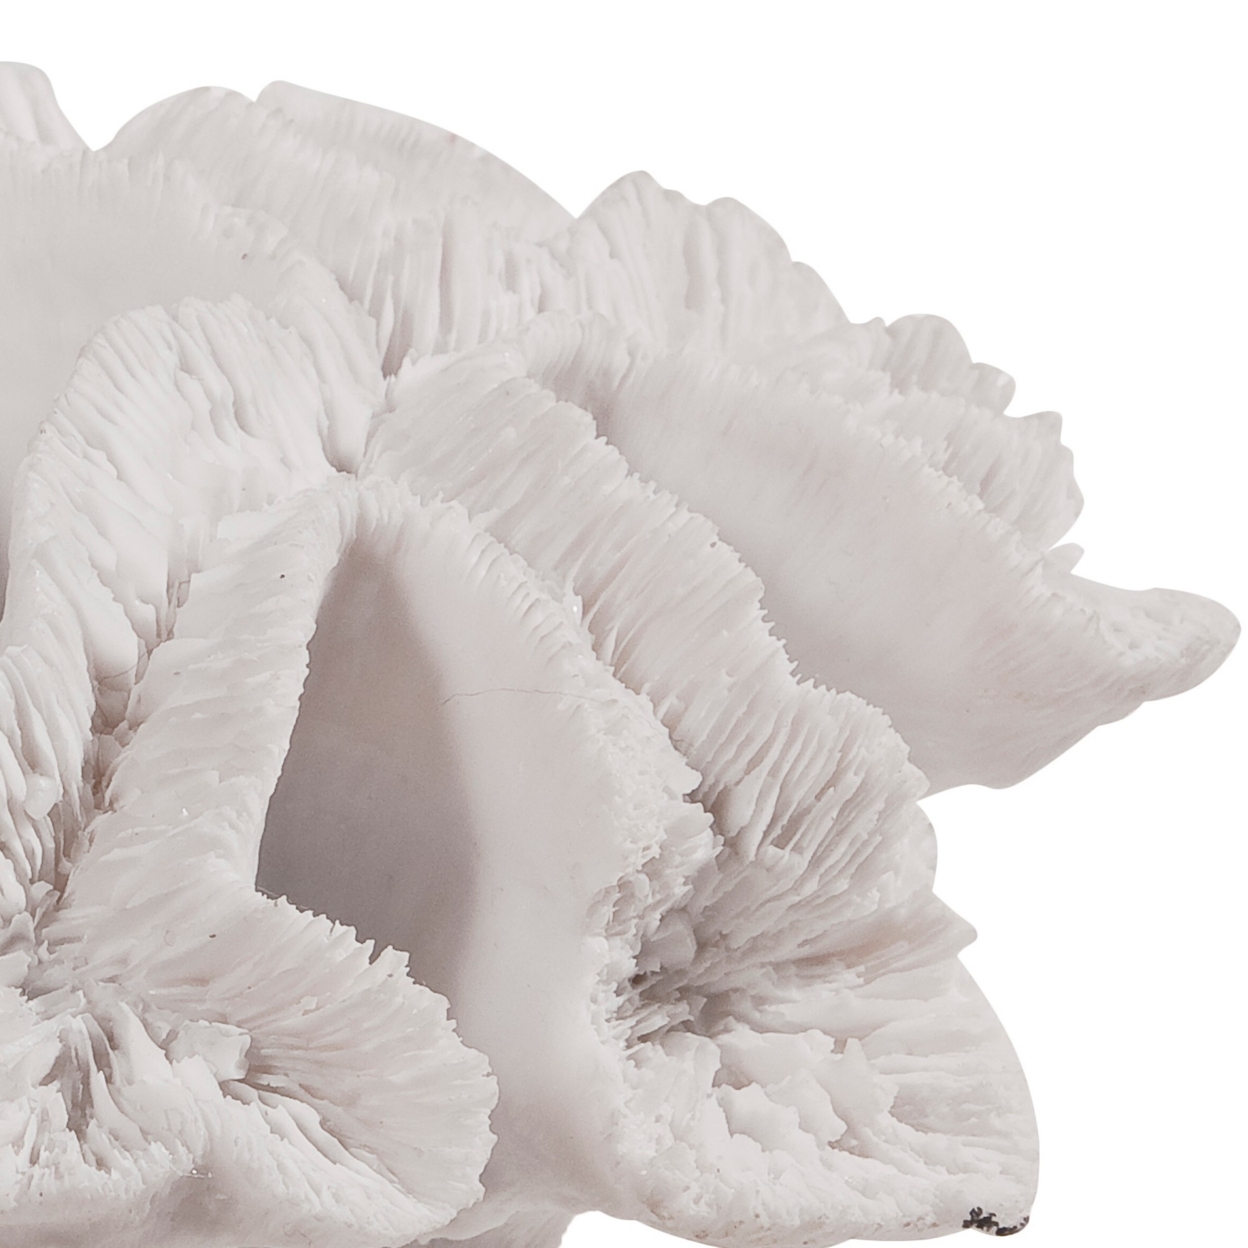 Lily 9 Inch Faux Coral Table Figurine, Polyresin Textured Sculpture, White- Saltoro Sherpi